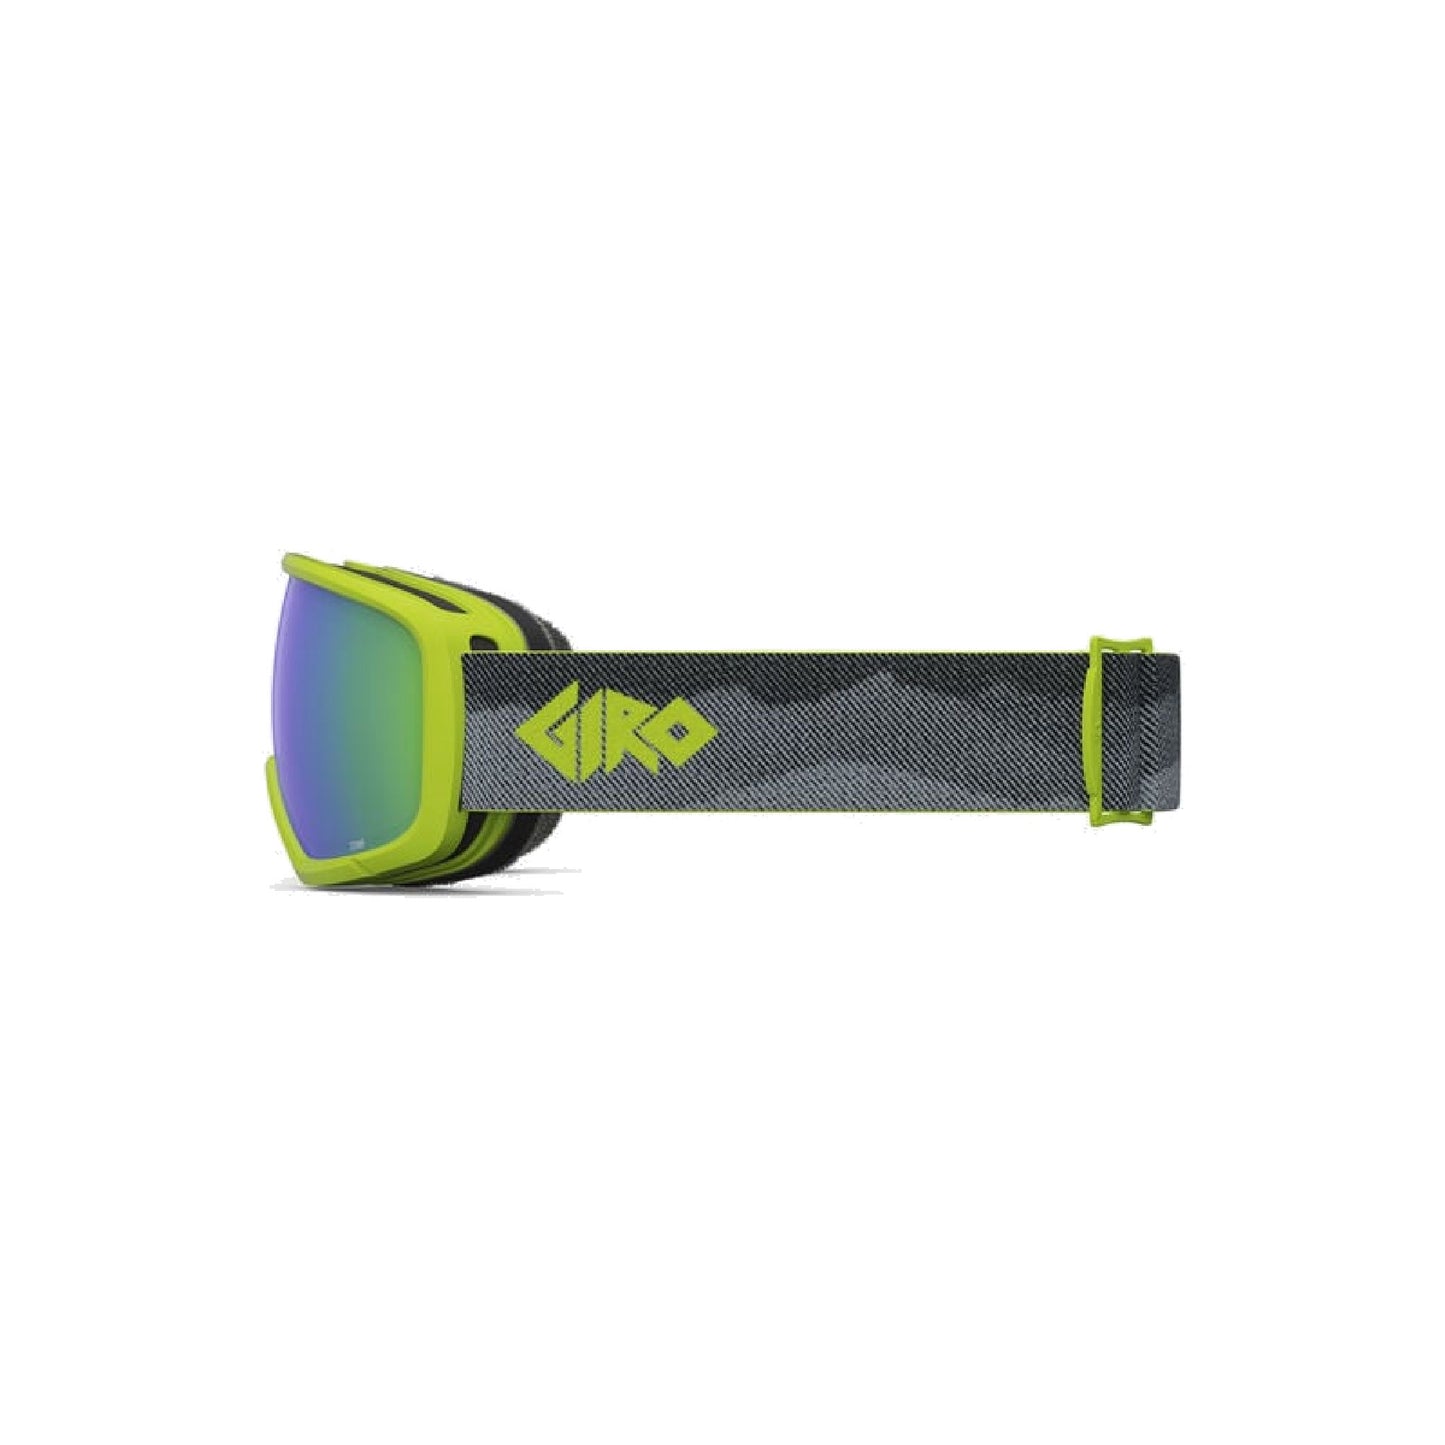 Giro Youth Stomp Snow Goggles Ano Lime Linticular Loden Green Snow Goggles